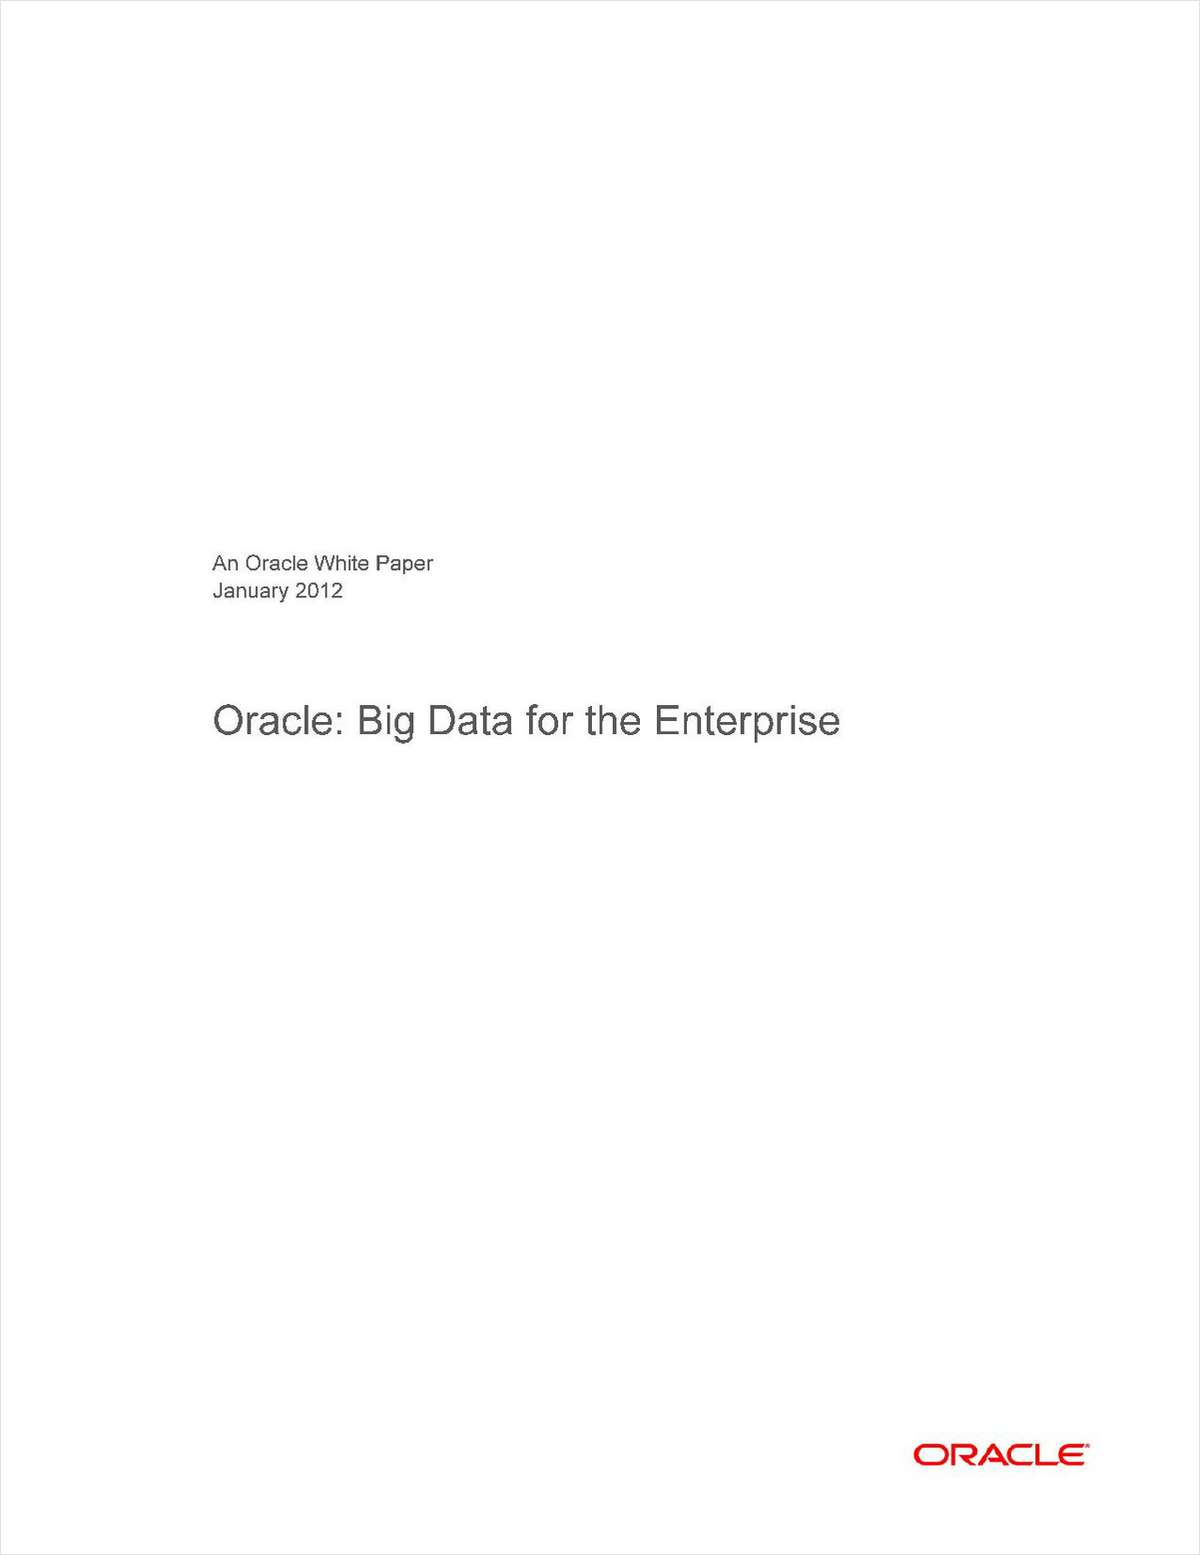 Oracle: Big Data for the Enterprise